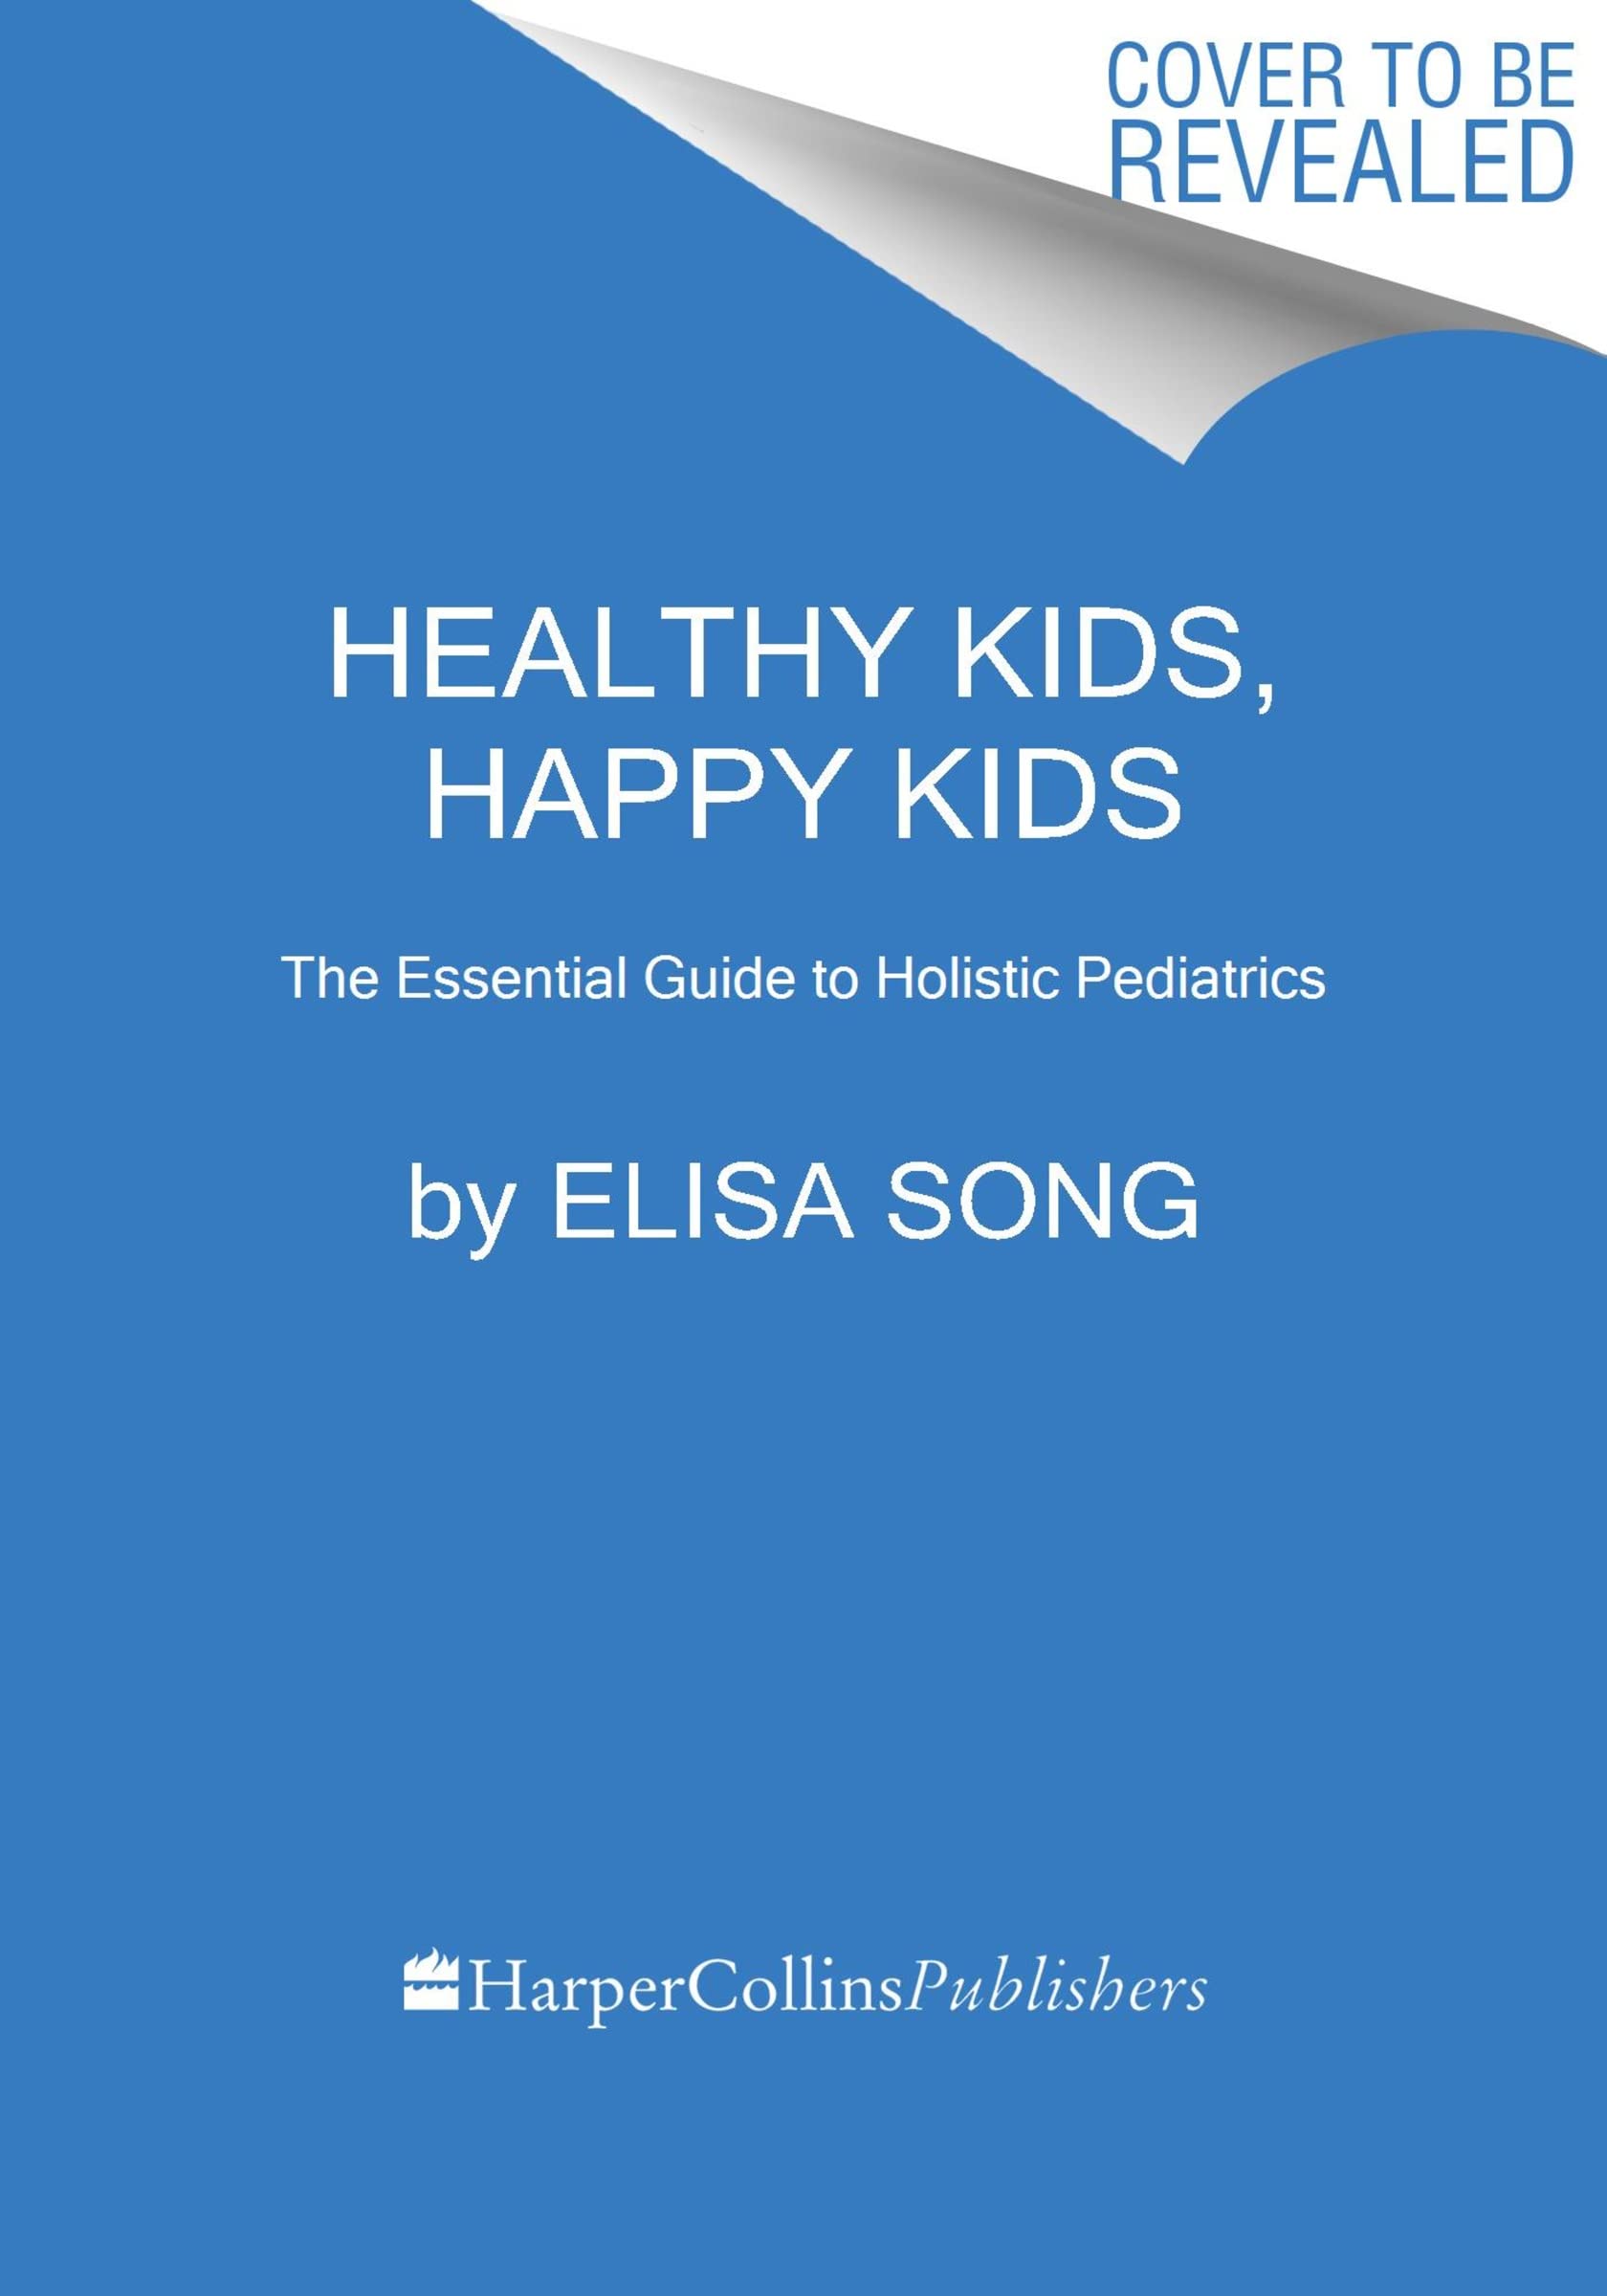 Healthy Kids, Happy Kids: An Integrative Pediatrician's Guide to Whole Child Wellness